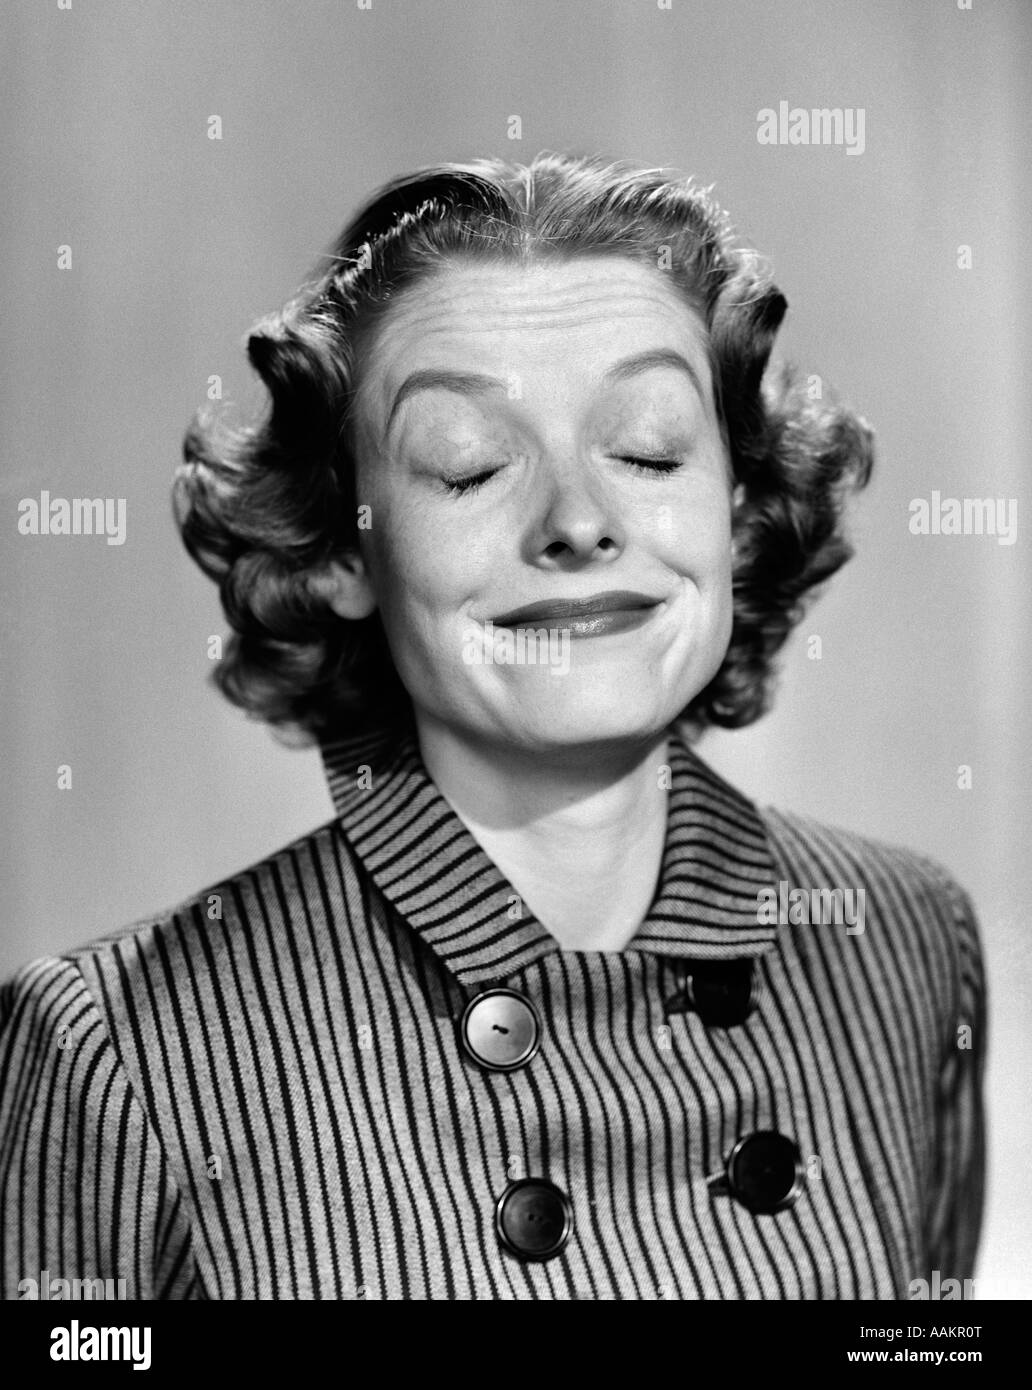 1950s 1960s PORTRAIT WOMAN SMILING EYES CLOSED MAKING A FUNNY FACE WEARING A STRIPED DRESS WITH BUTTONS Stock Photo